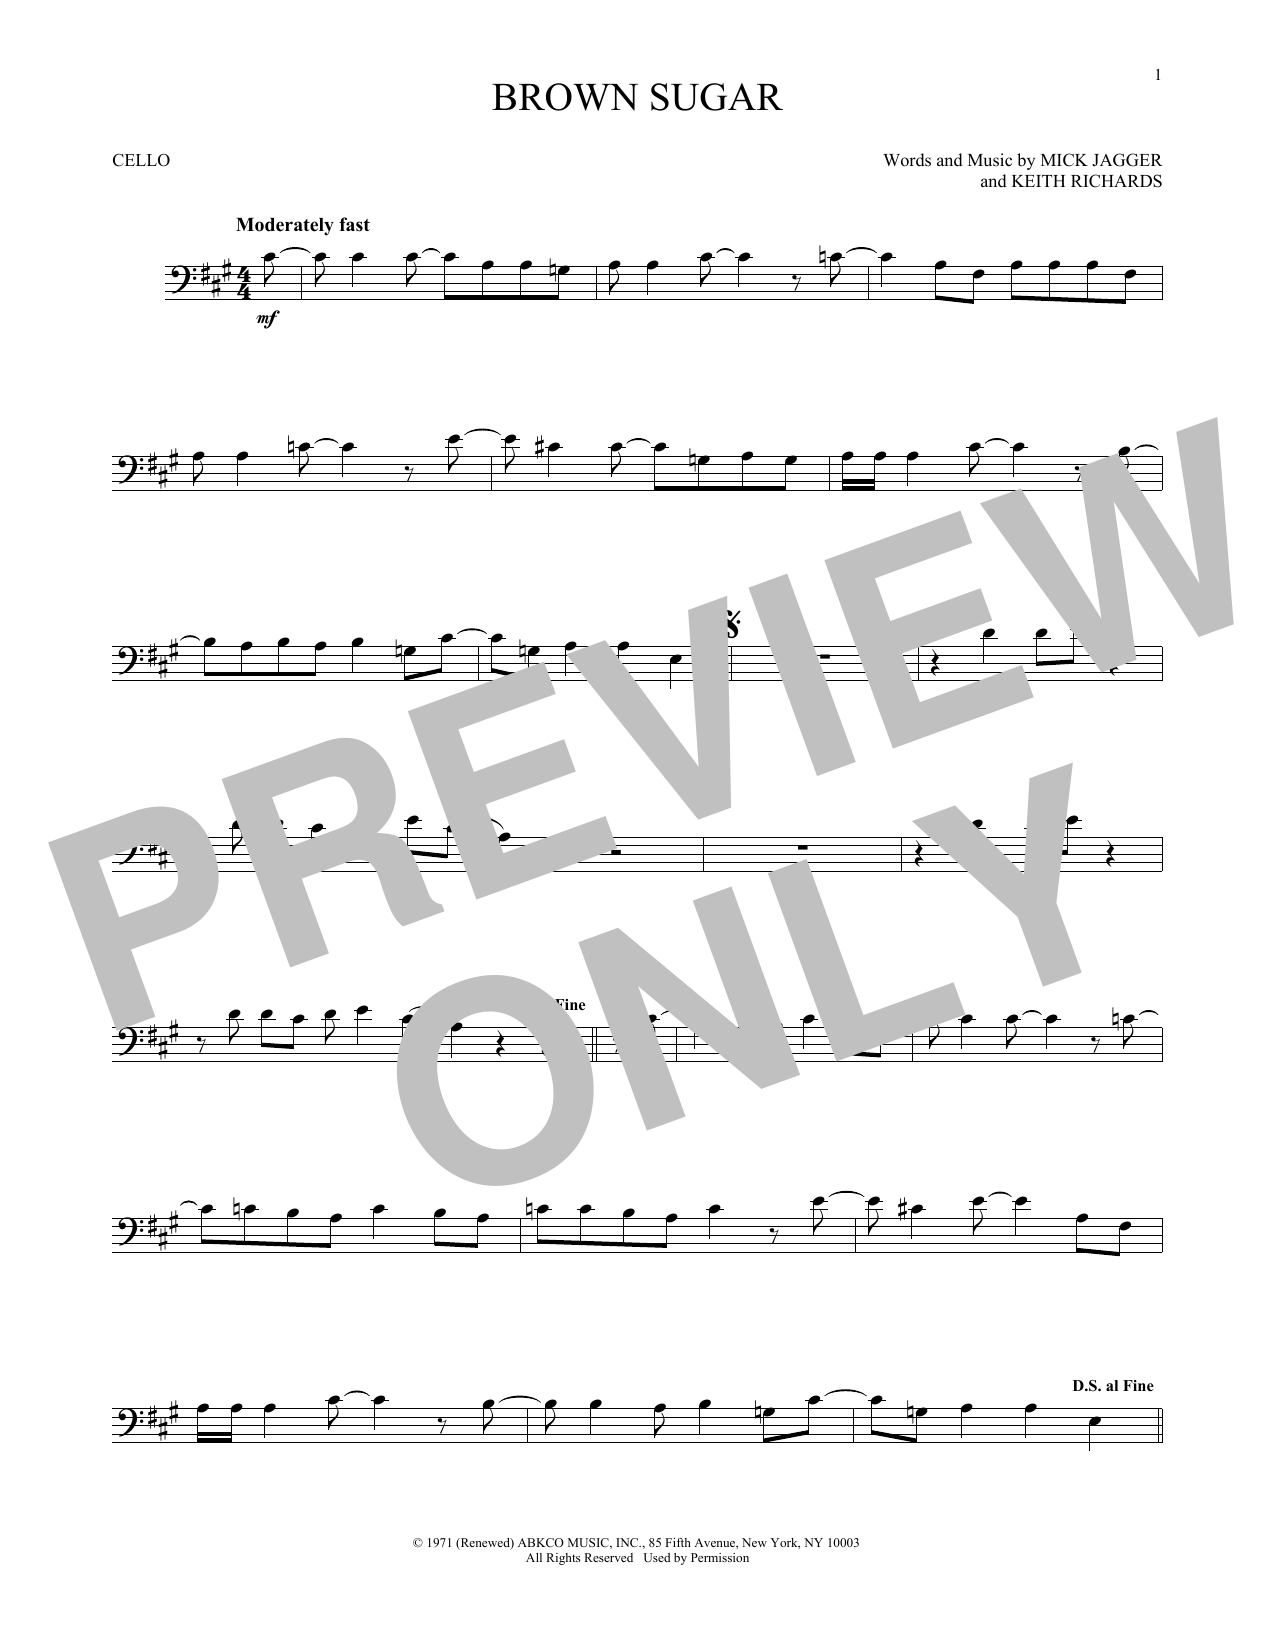 Download The Rolling Stones Brown Sugar Sheet Music